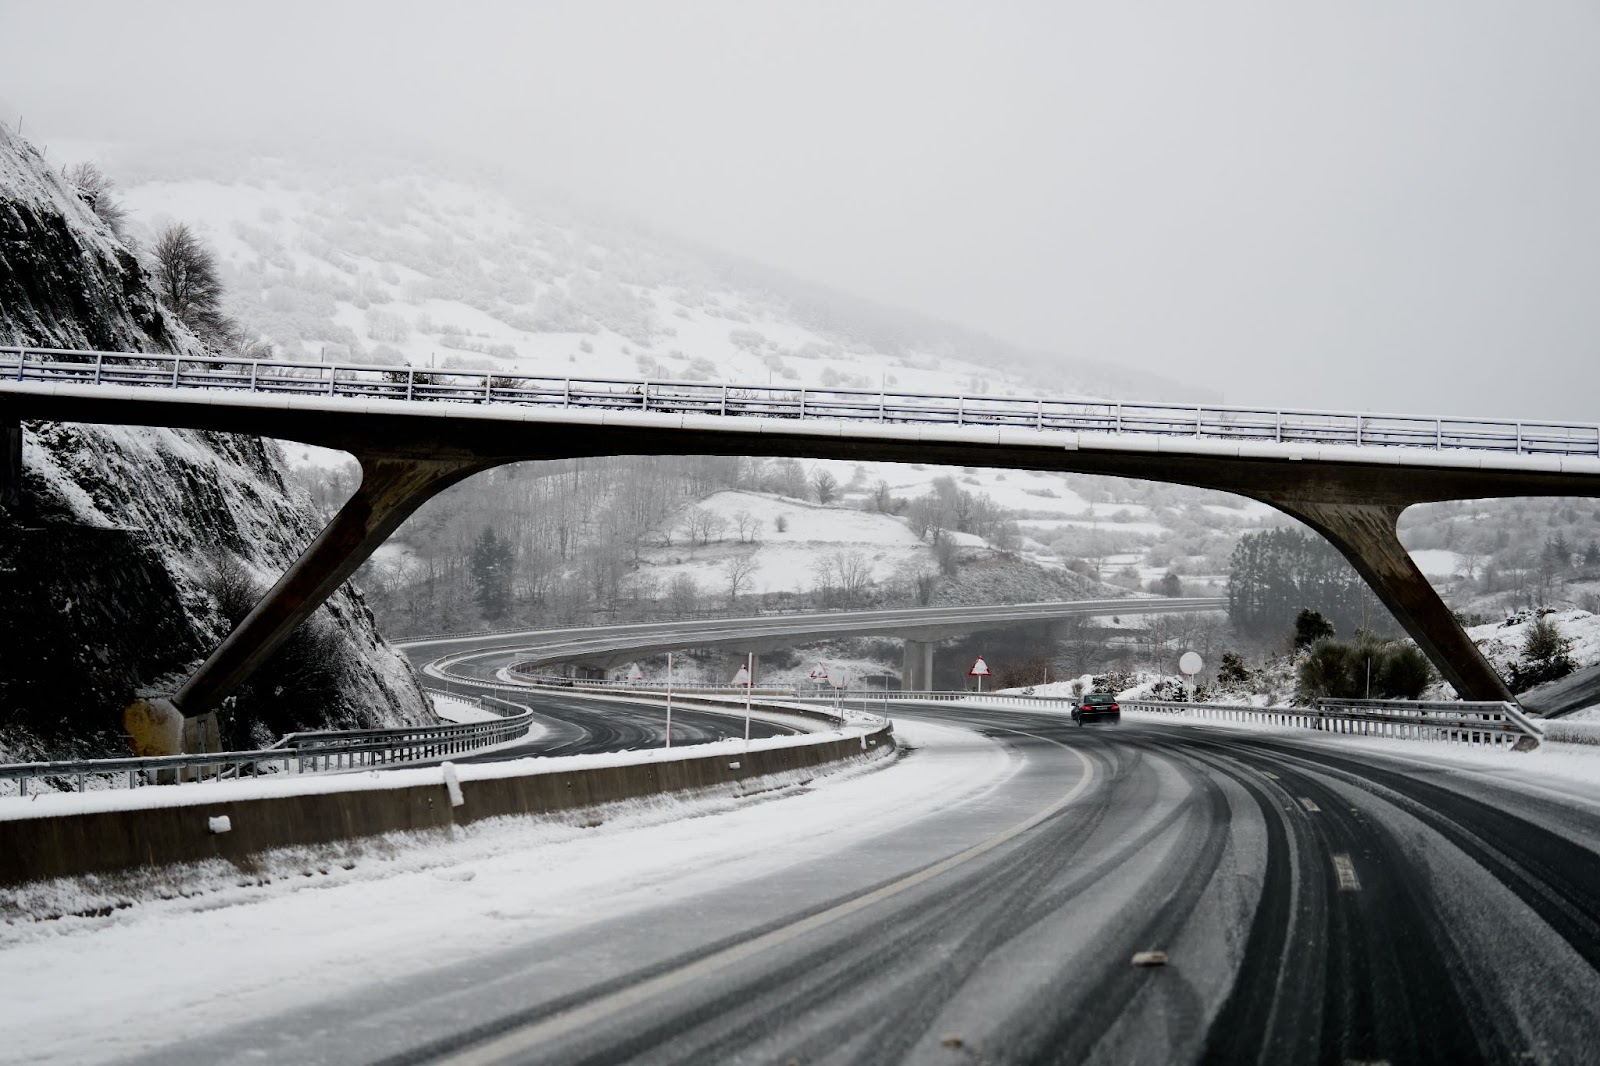 A snow-covered road under a bridge